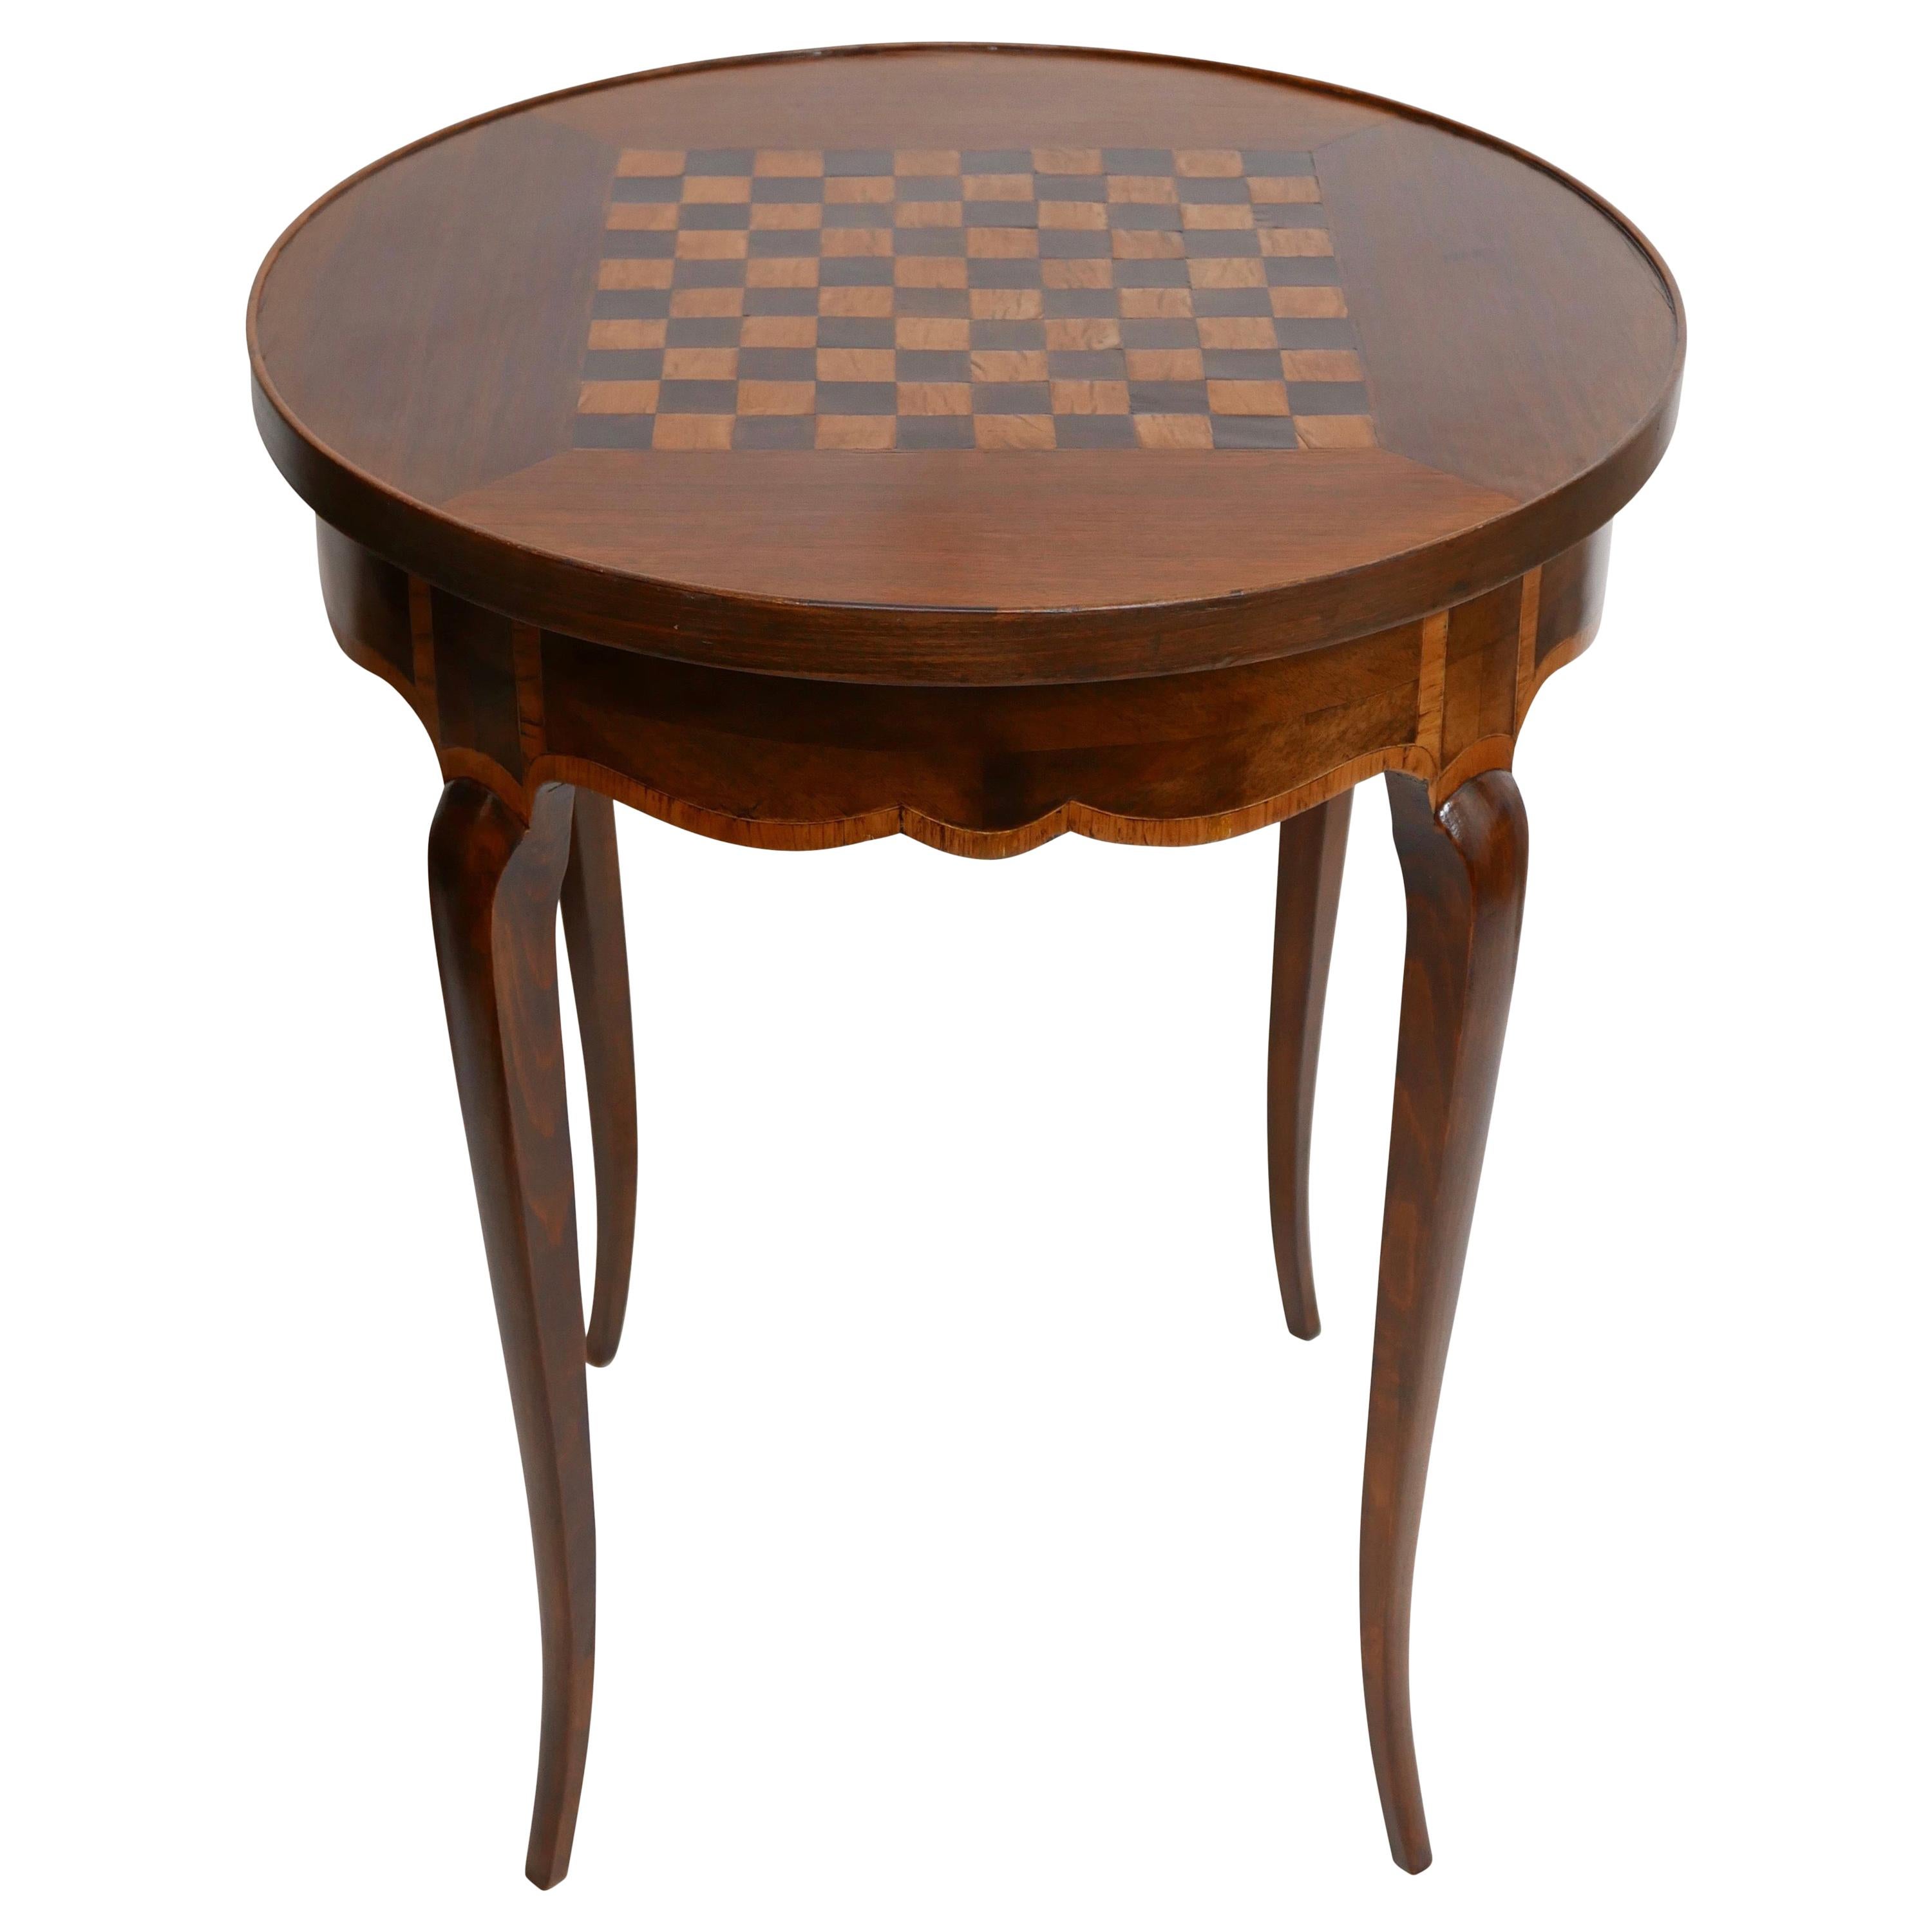 Walnut Circular Tric Trac Game Table with Fruitwood Inlay, Mid-19th Century